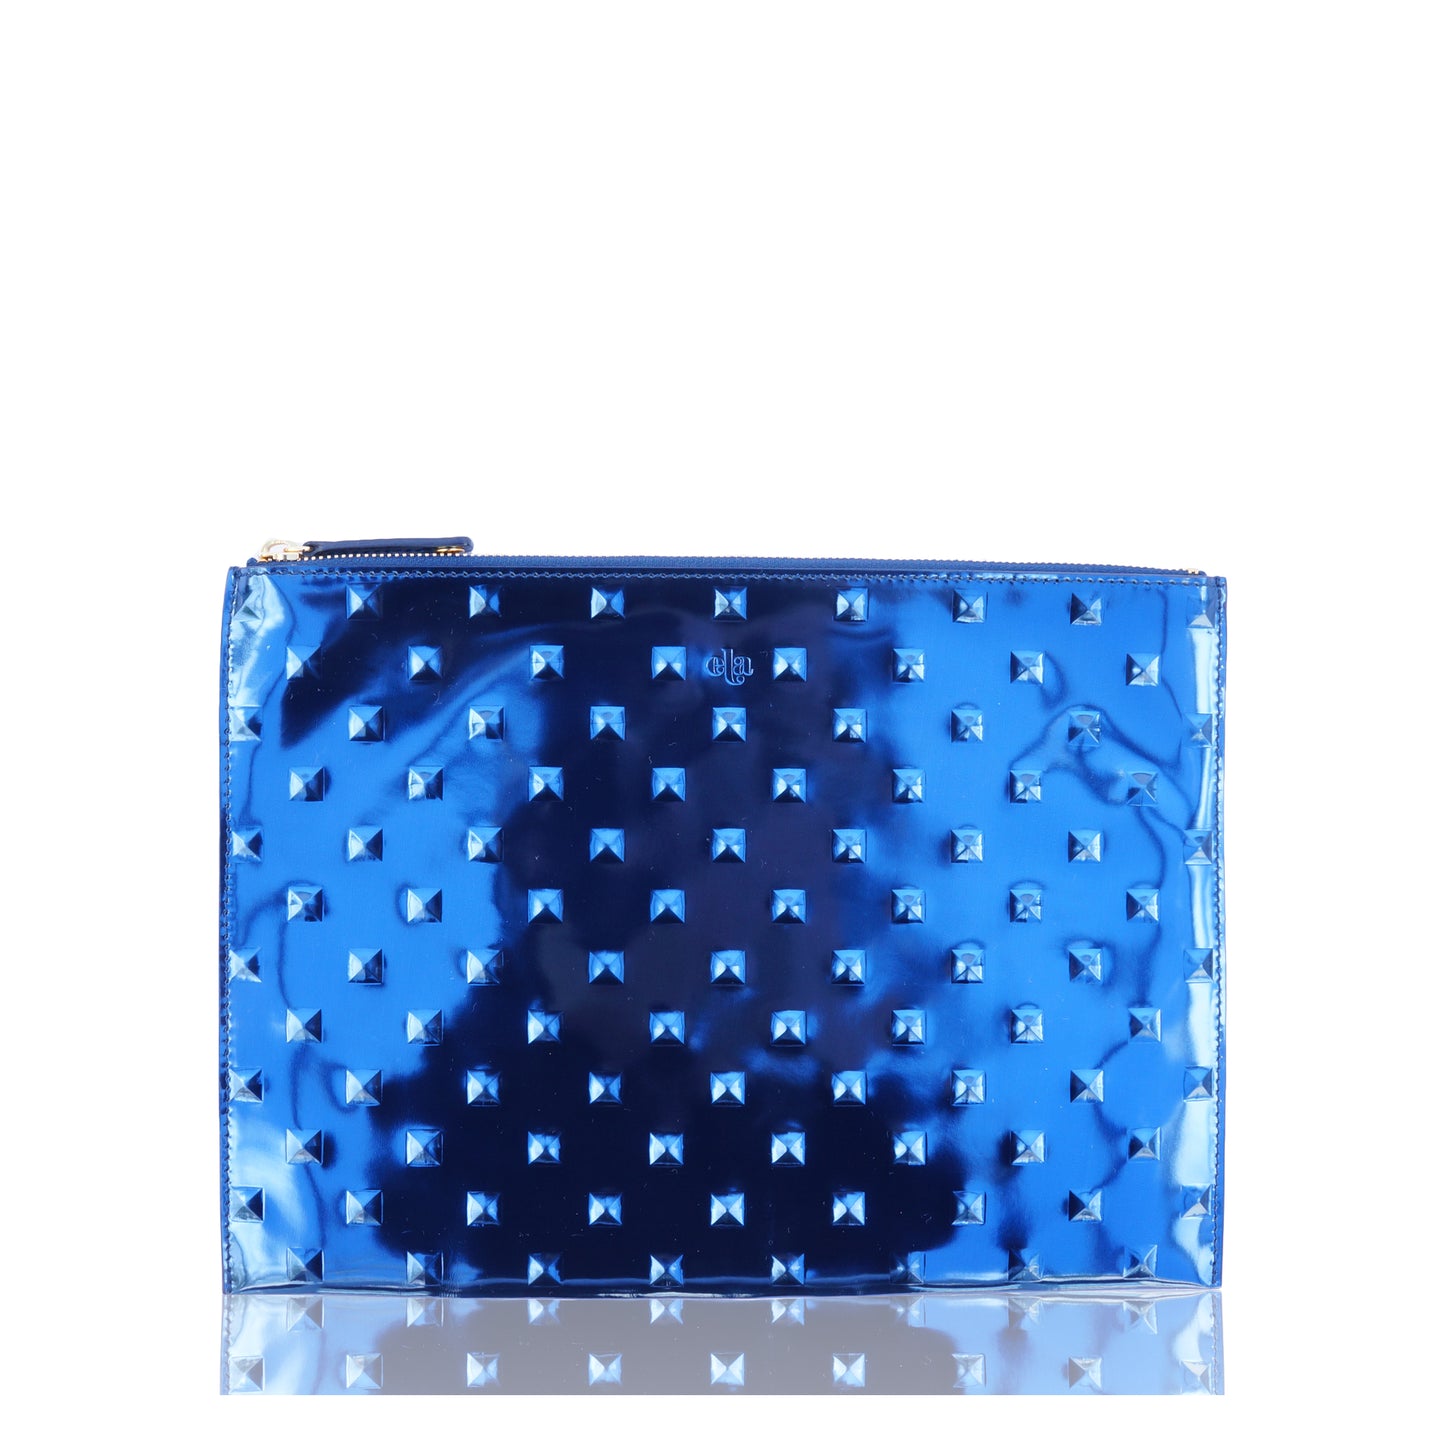 ELA STUDDED EDITOR'S POUCH MIRROR BLUE CLUTCH NEW WITH TAGS - leefluxury.com